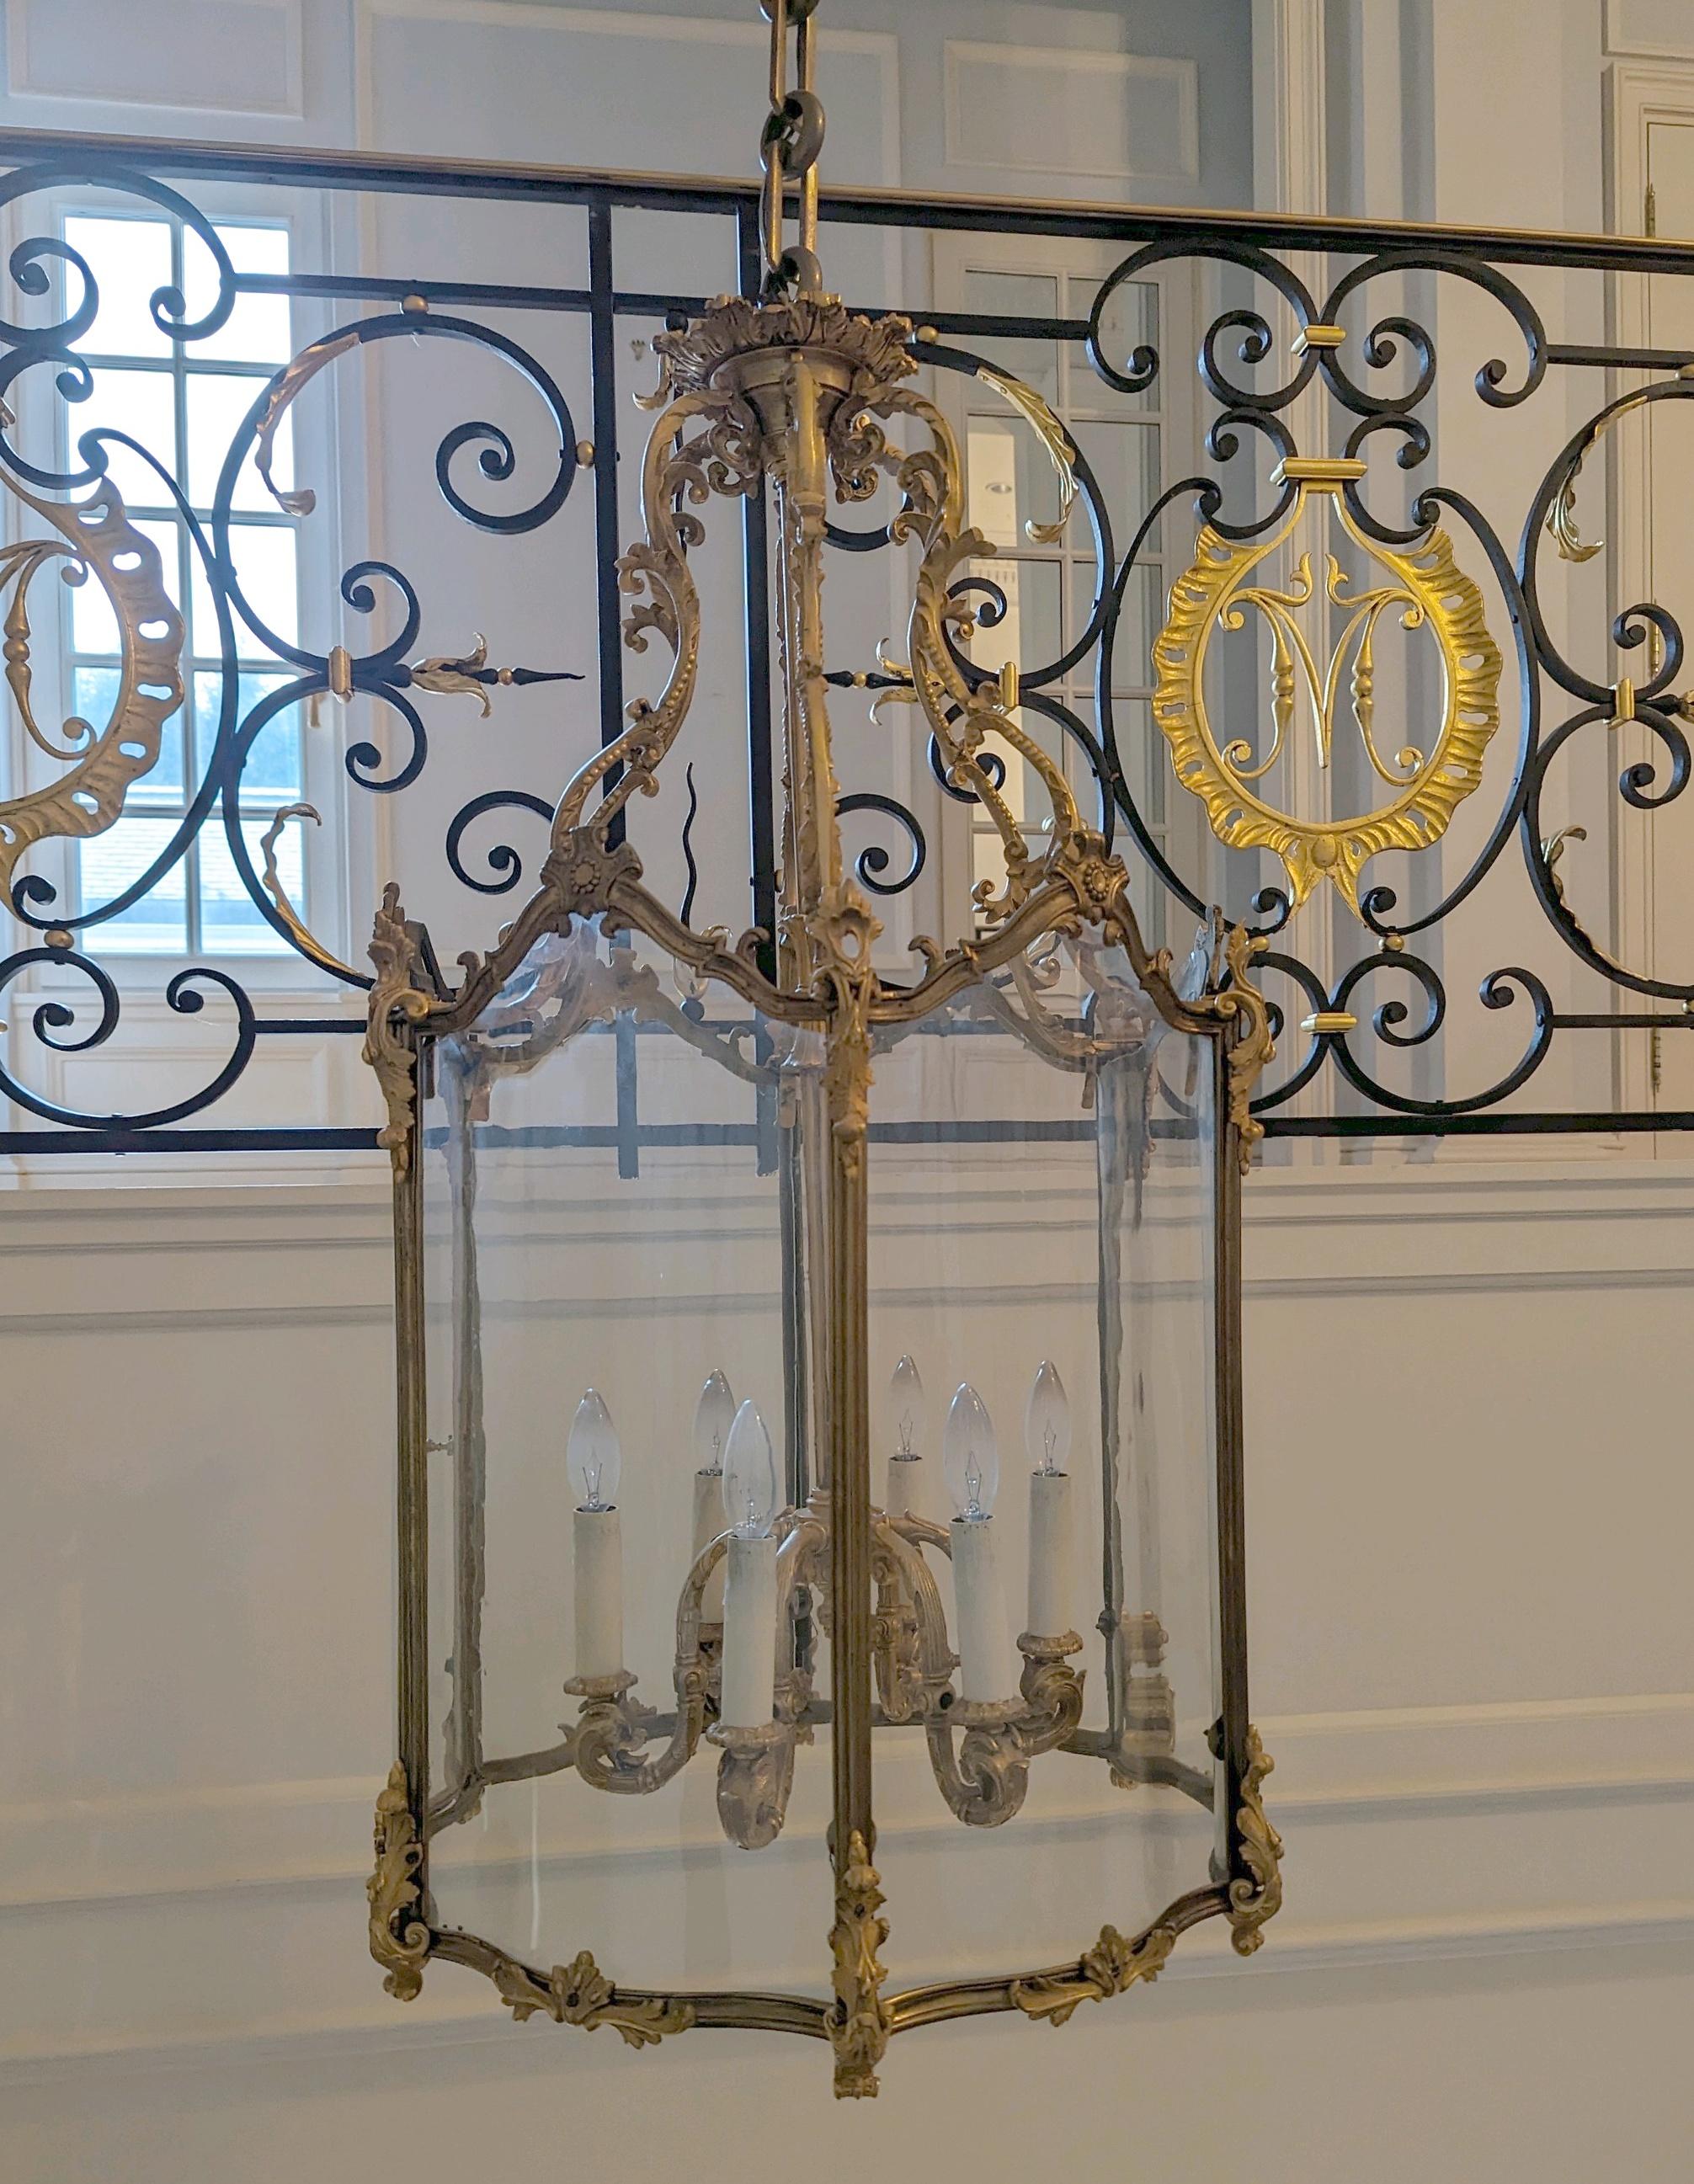 European gilt bronze ornate lantern pendant light with six up light arms and clear curved glass panels. This was retrieved from an estate located in Greenwich, Connecticut. Good condition with appropriate wear from age. One available. Cleaned and